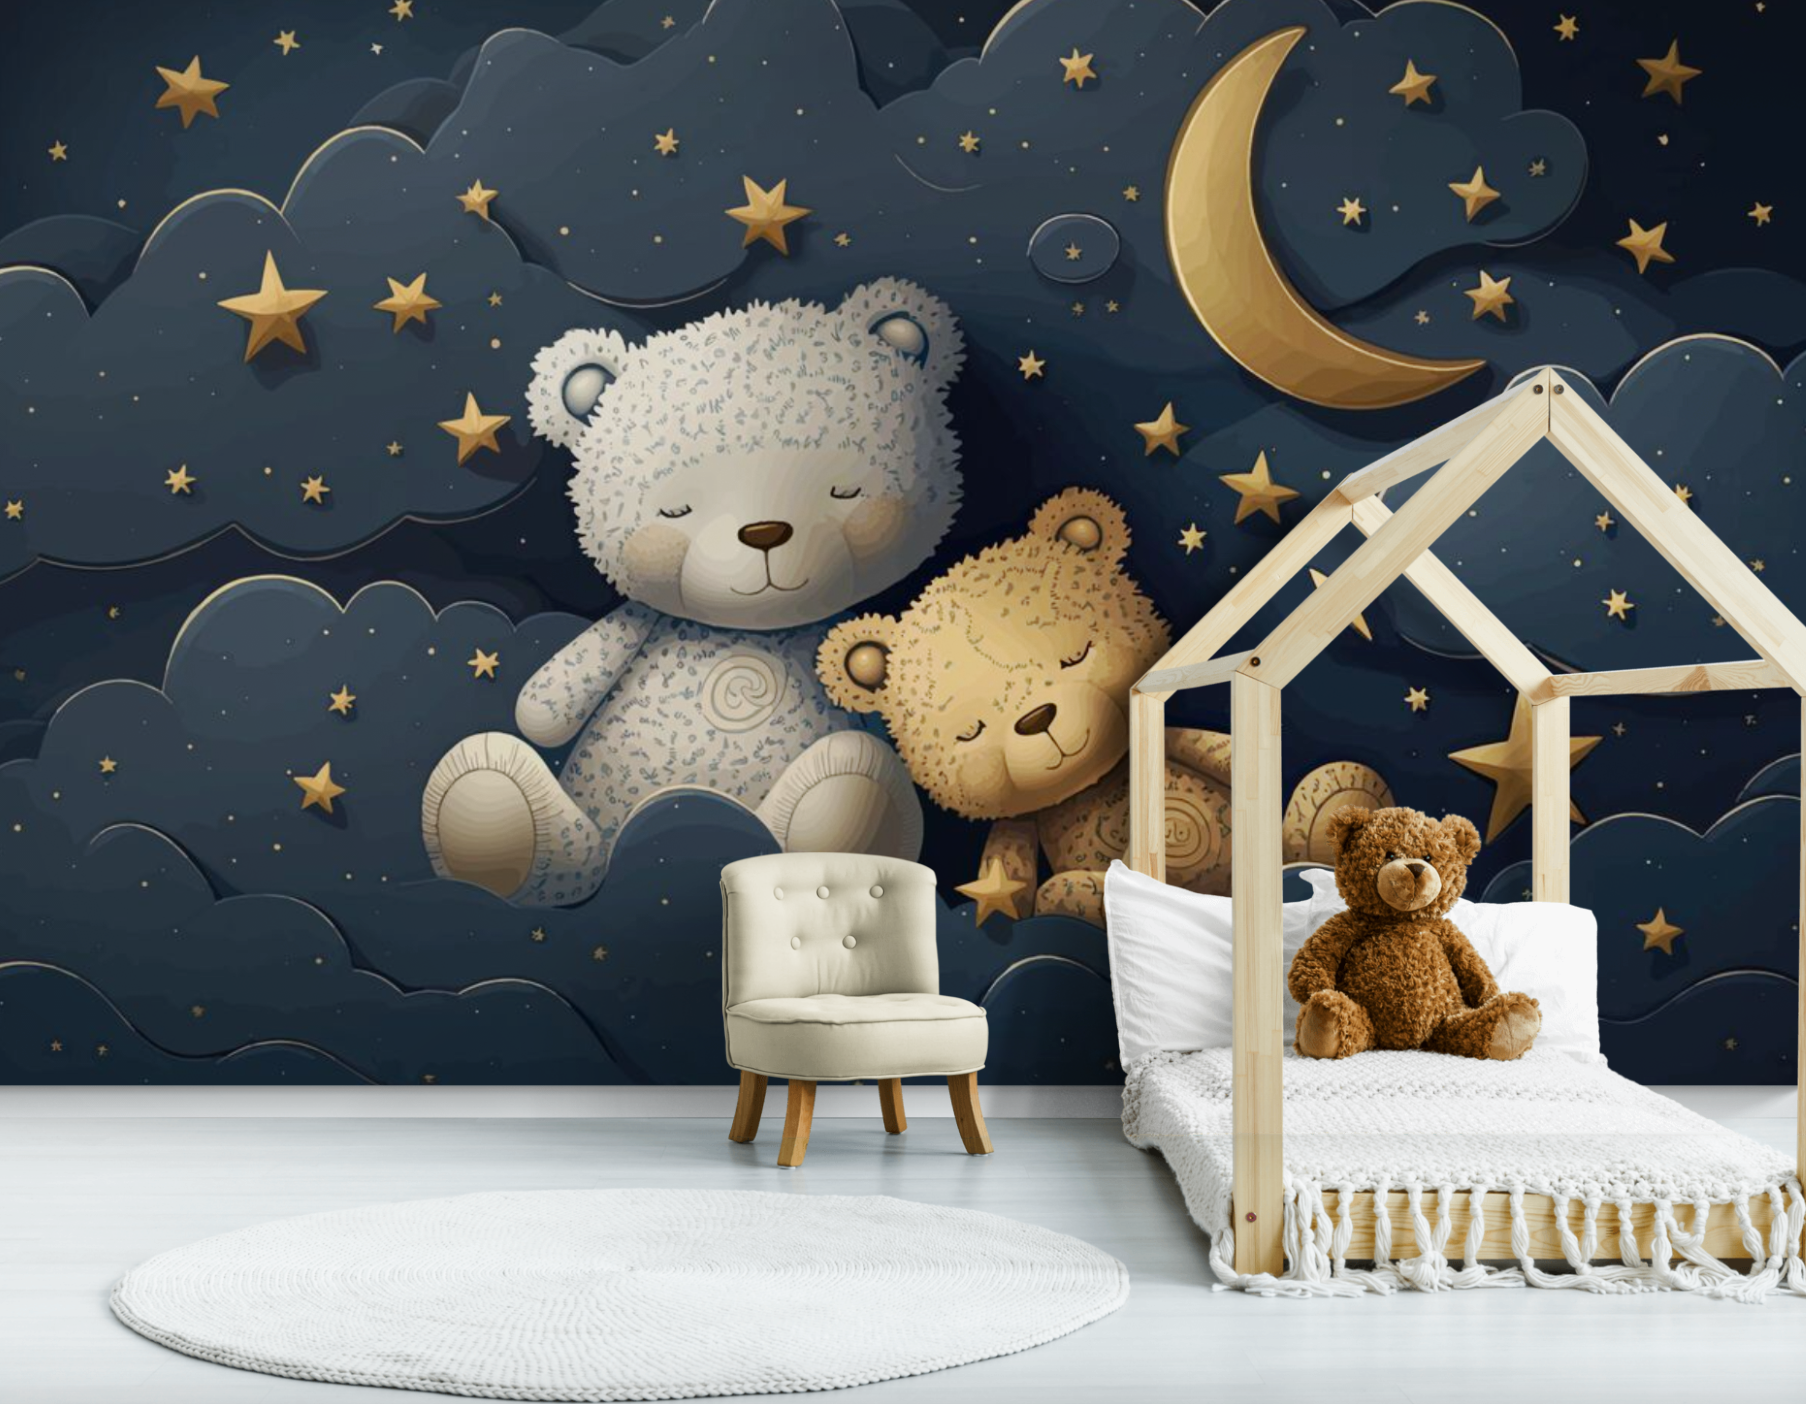 Free download Download Free 100 Lovely Teddy Bear Wallpaper Images The  [1920x1200] for your Desktop, Mobile & Tablet | Explore 73+ Cute Teddy Bear  Wallpapers | Teddy Bear Wallpapers, Cute Teddy Bear